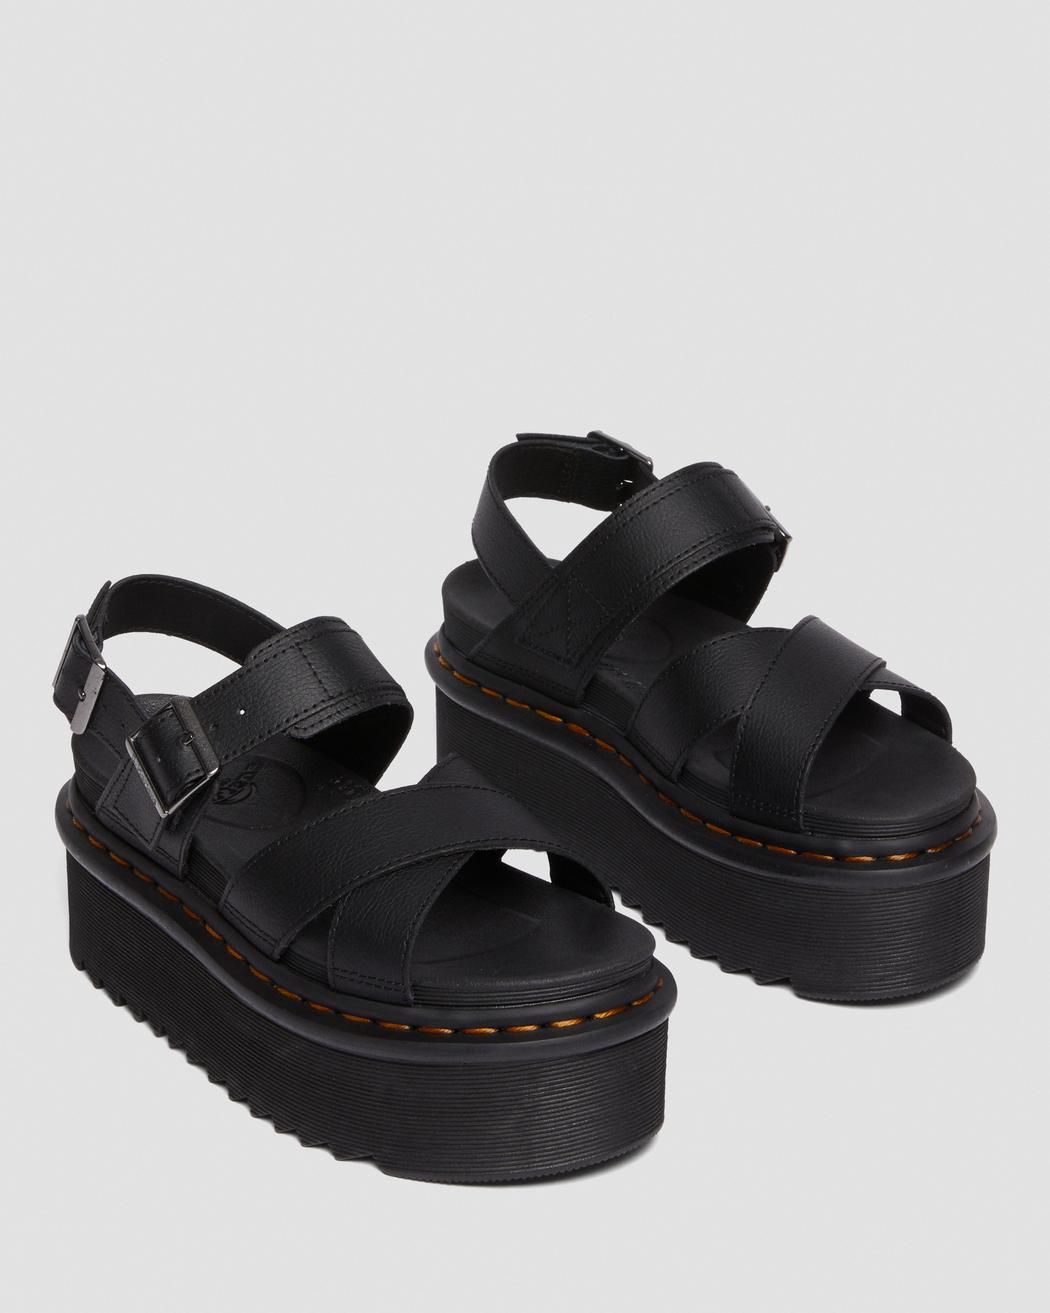 Dr. Martens Voss II Black Hydro Leather Sandals 26799001